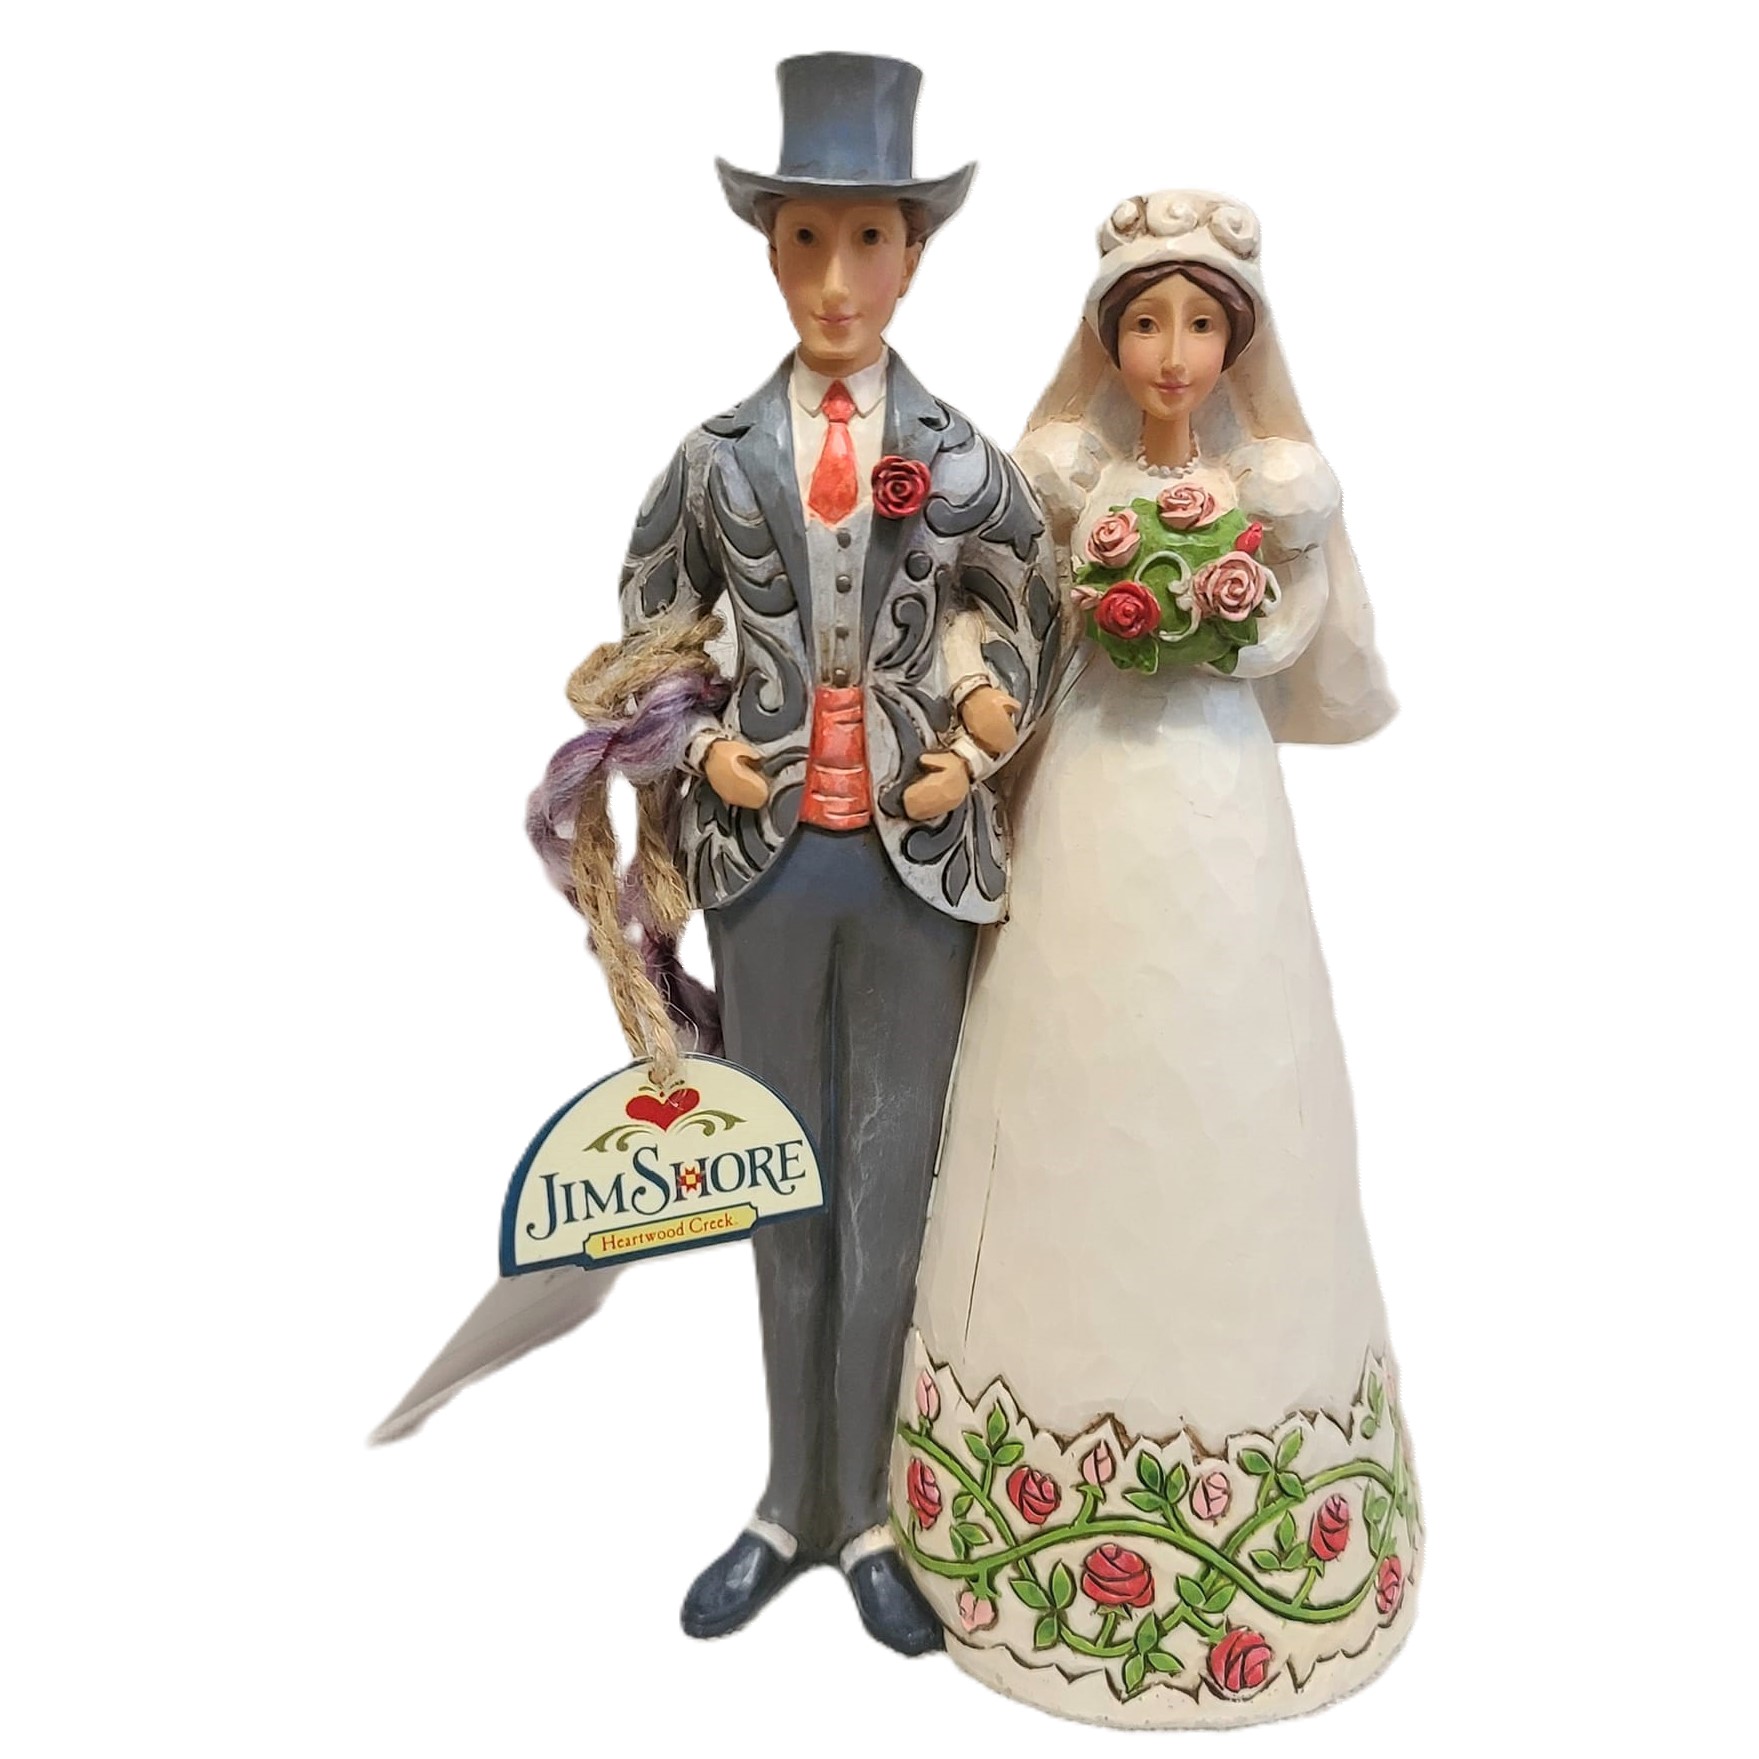 Jim Shore Cake Topper Bride and Groom Victorian - Click Image to Close